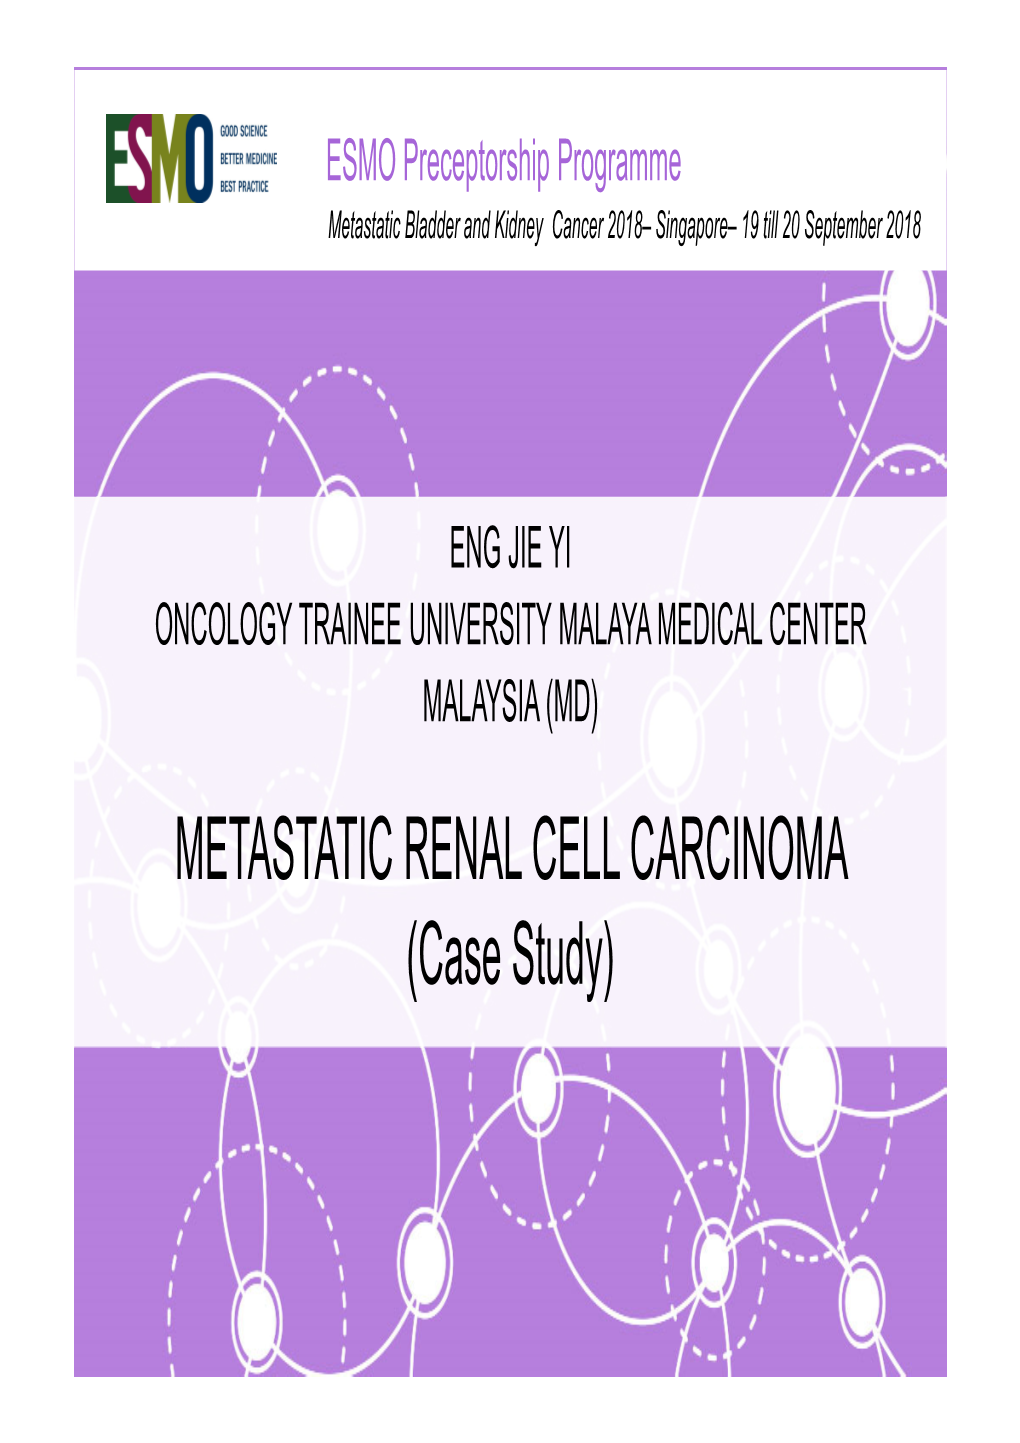 METASTATIC RENAL CELL CARCINOMA (Case Study) Disclosures